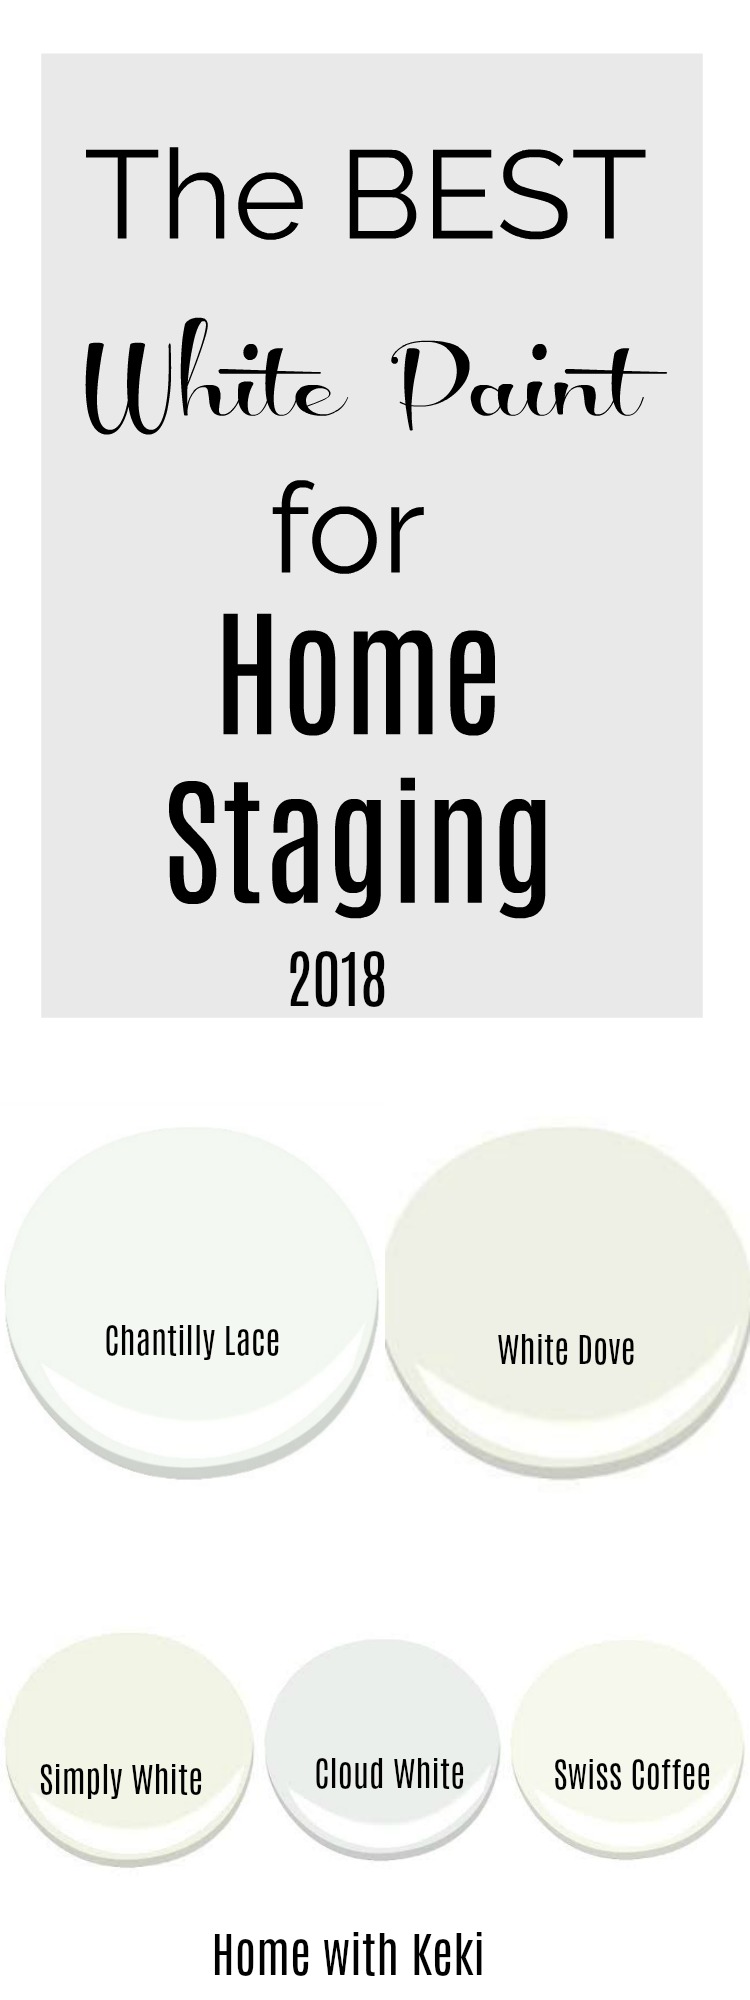 Sharing my top white paint colors for home staging in 2018, also great colors if you aren't staging cause white is the new gray. for more visit www.homewithkeki.com #whitepaint #paint #homestaging